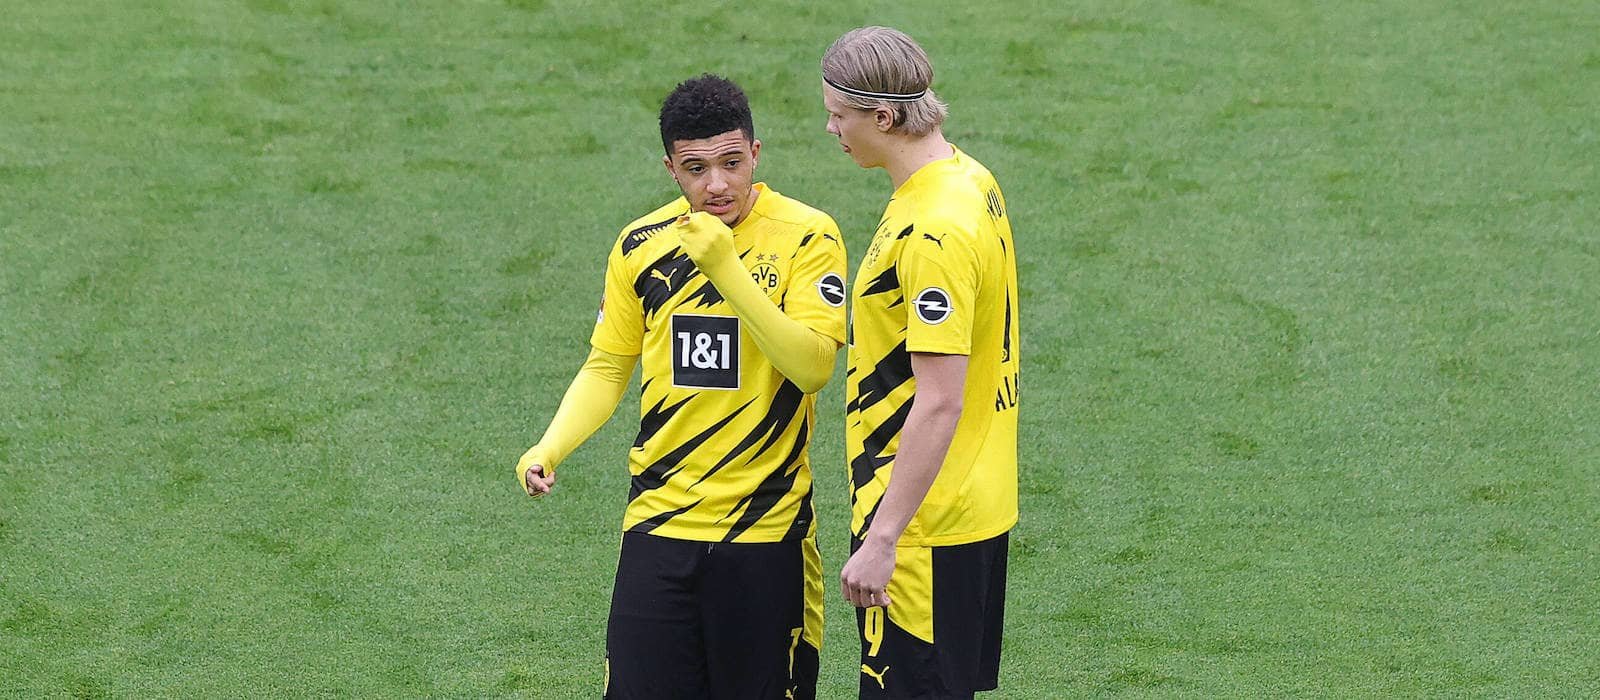 Erling Haaland reacts to Jadon Sancho securing loan deal back to Borussia Dortmund from Manchester United – Man United News And Transfer News